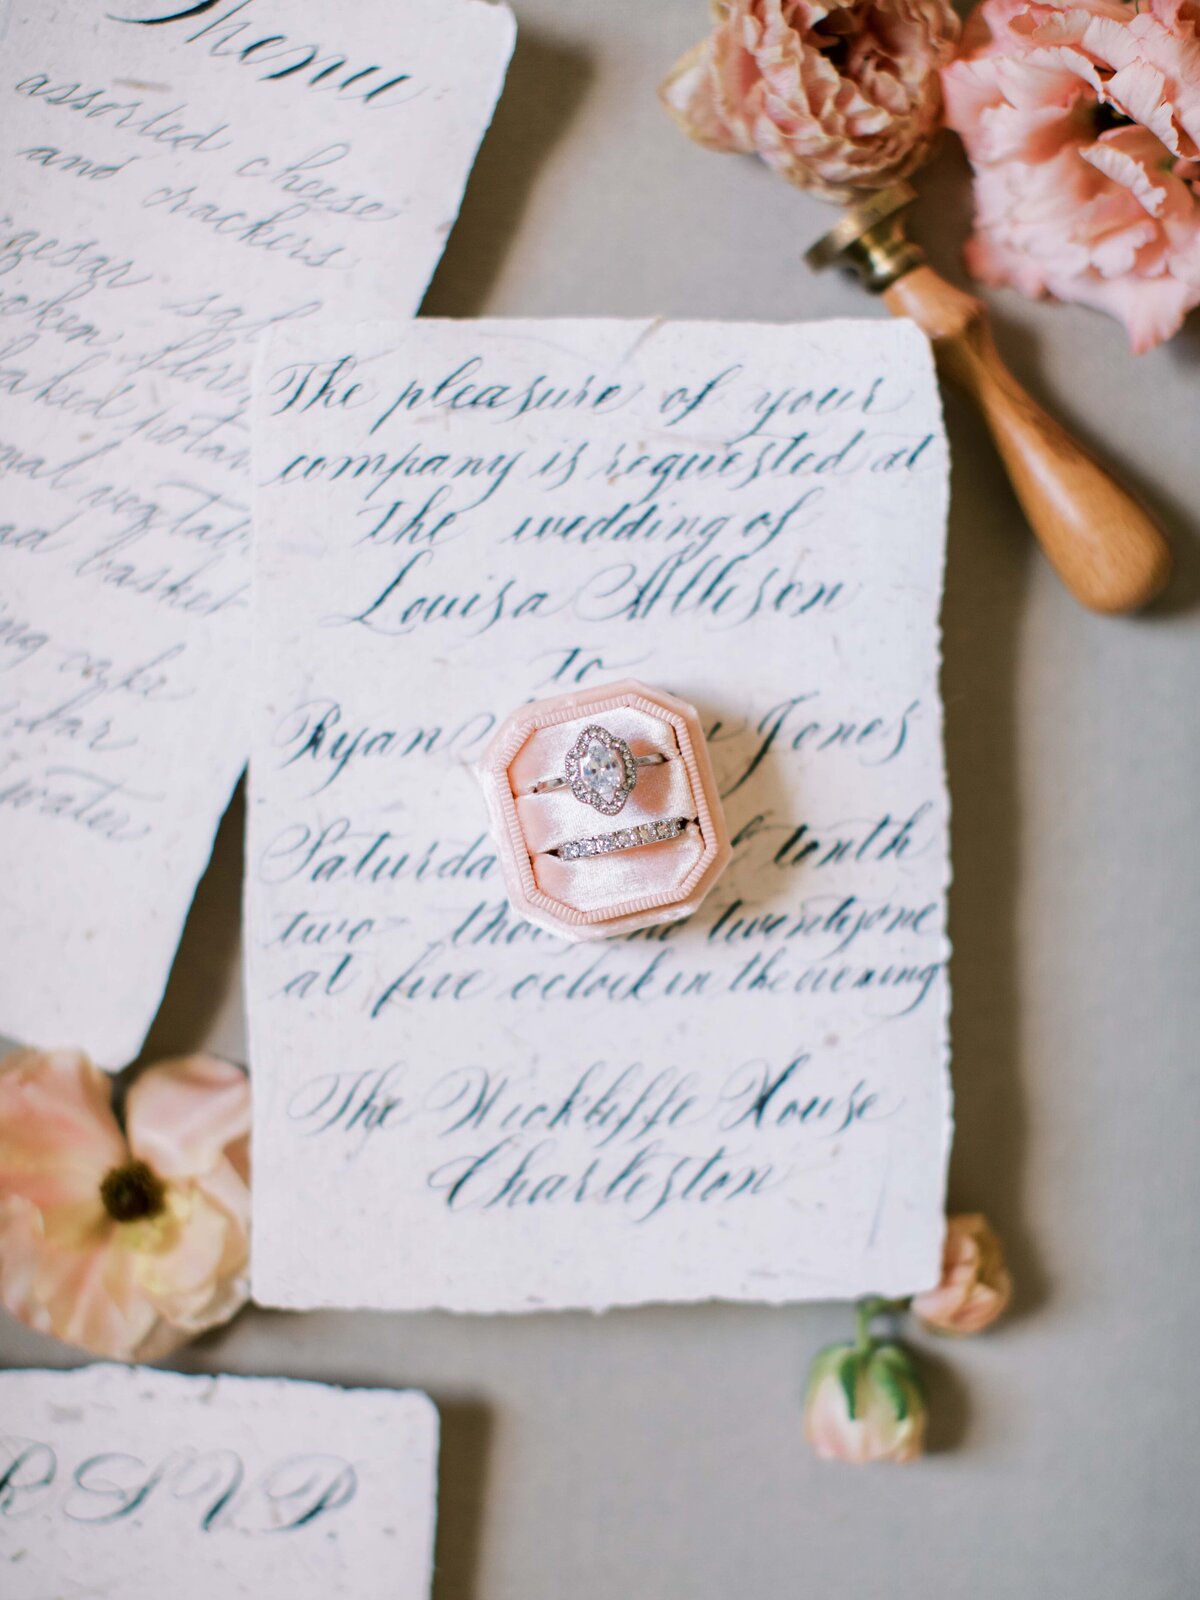 Image of a wedding ring and engagement ring in a velvet pink ring box on a hand written wedding invitation with pink blooms around it